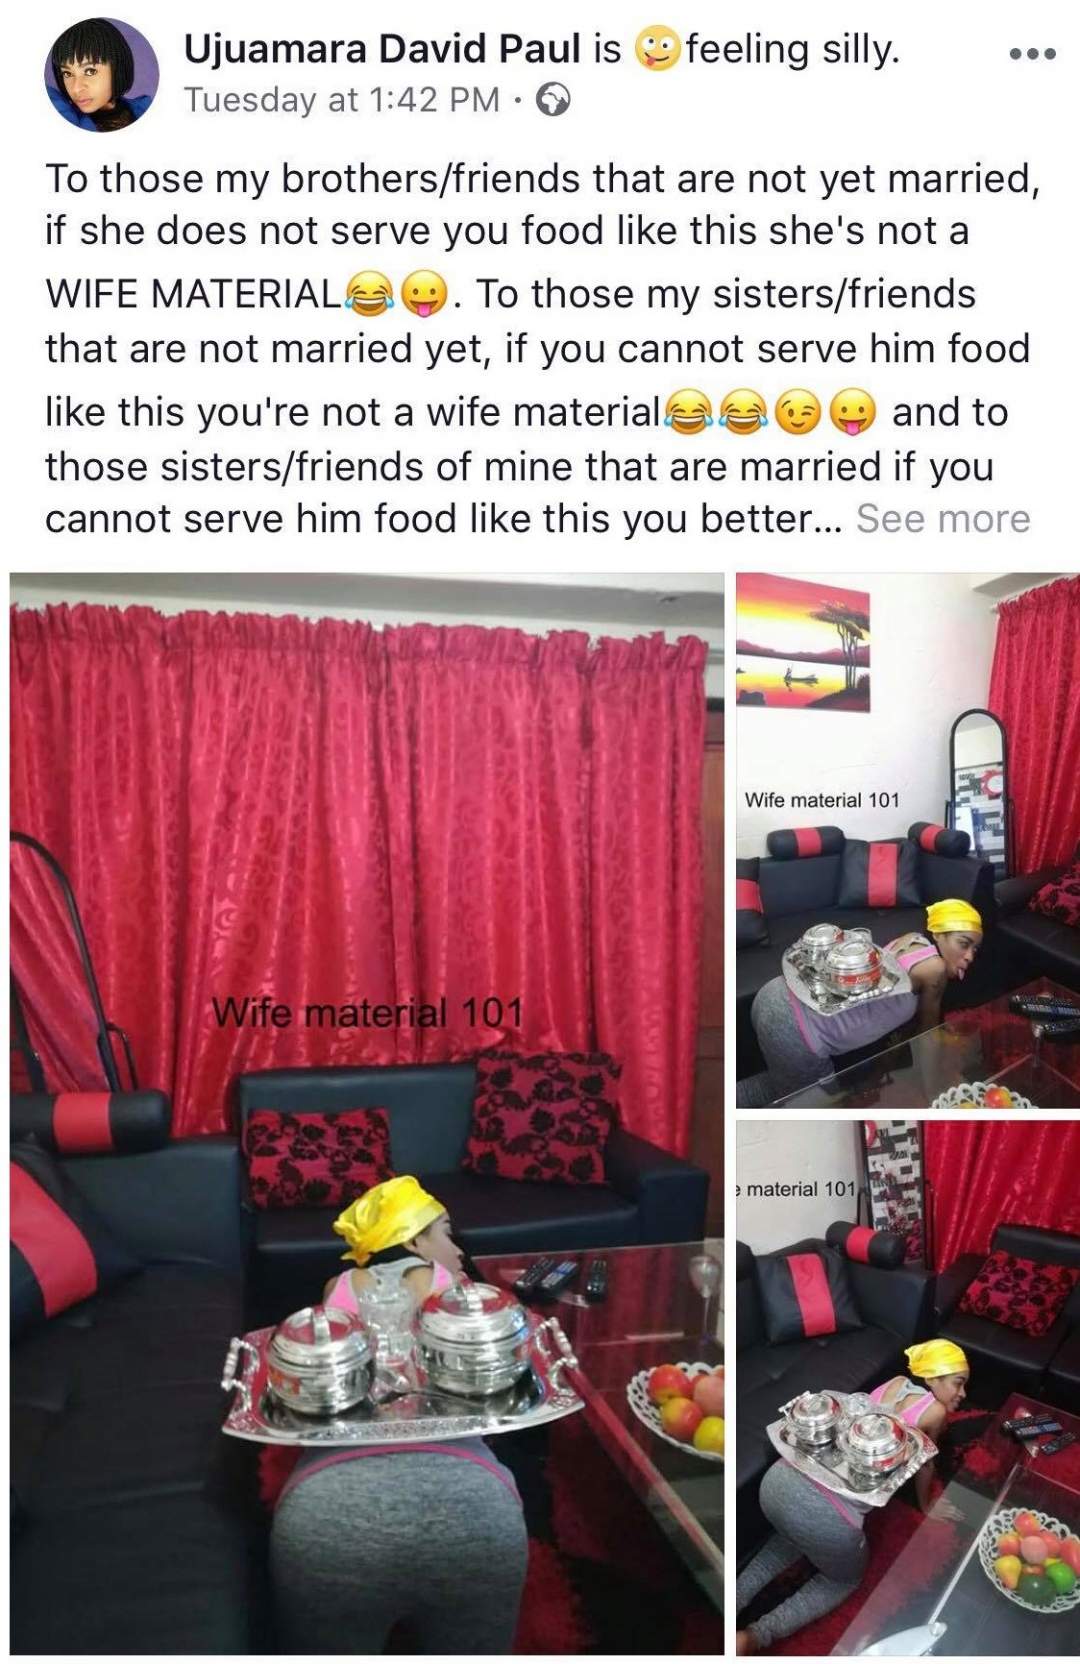 Nigerian Lady reveals how she serves food to her husband, tells other women to do same